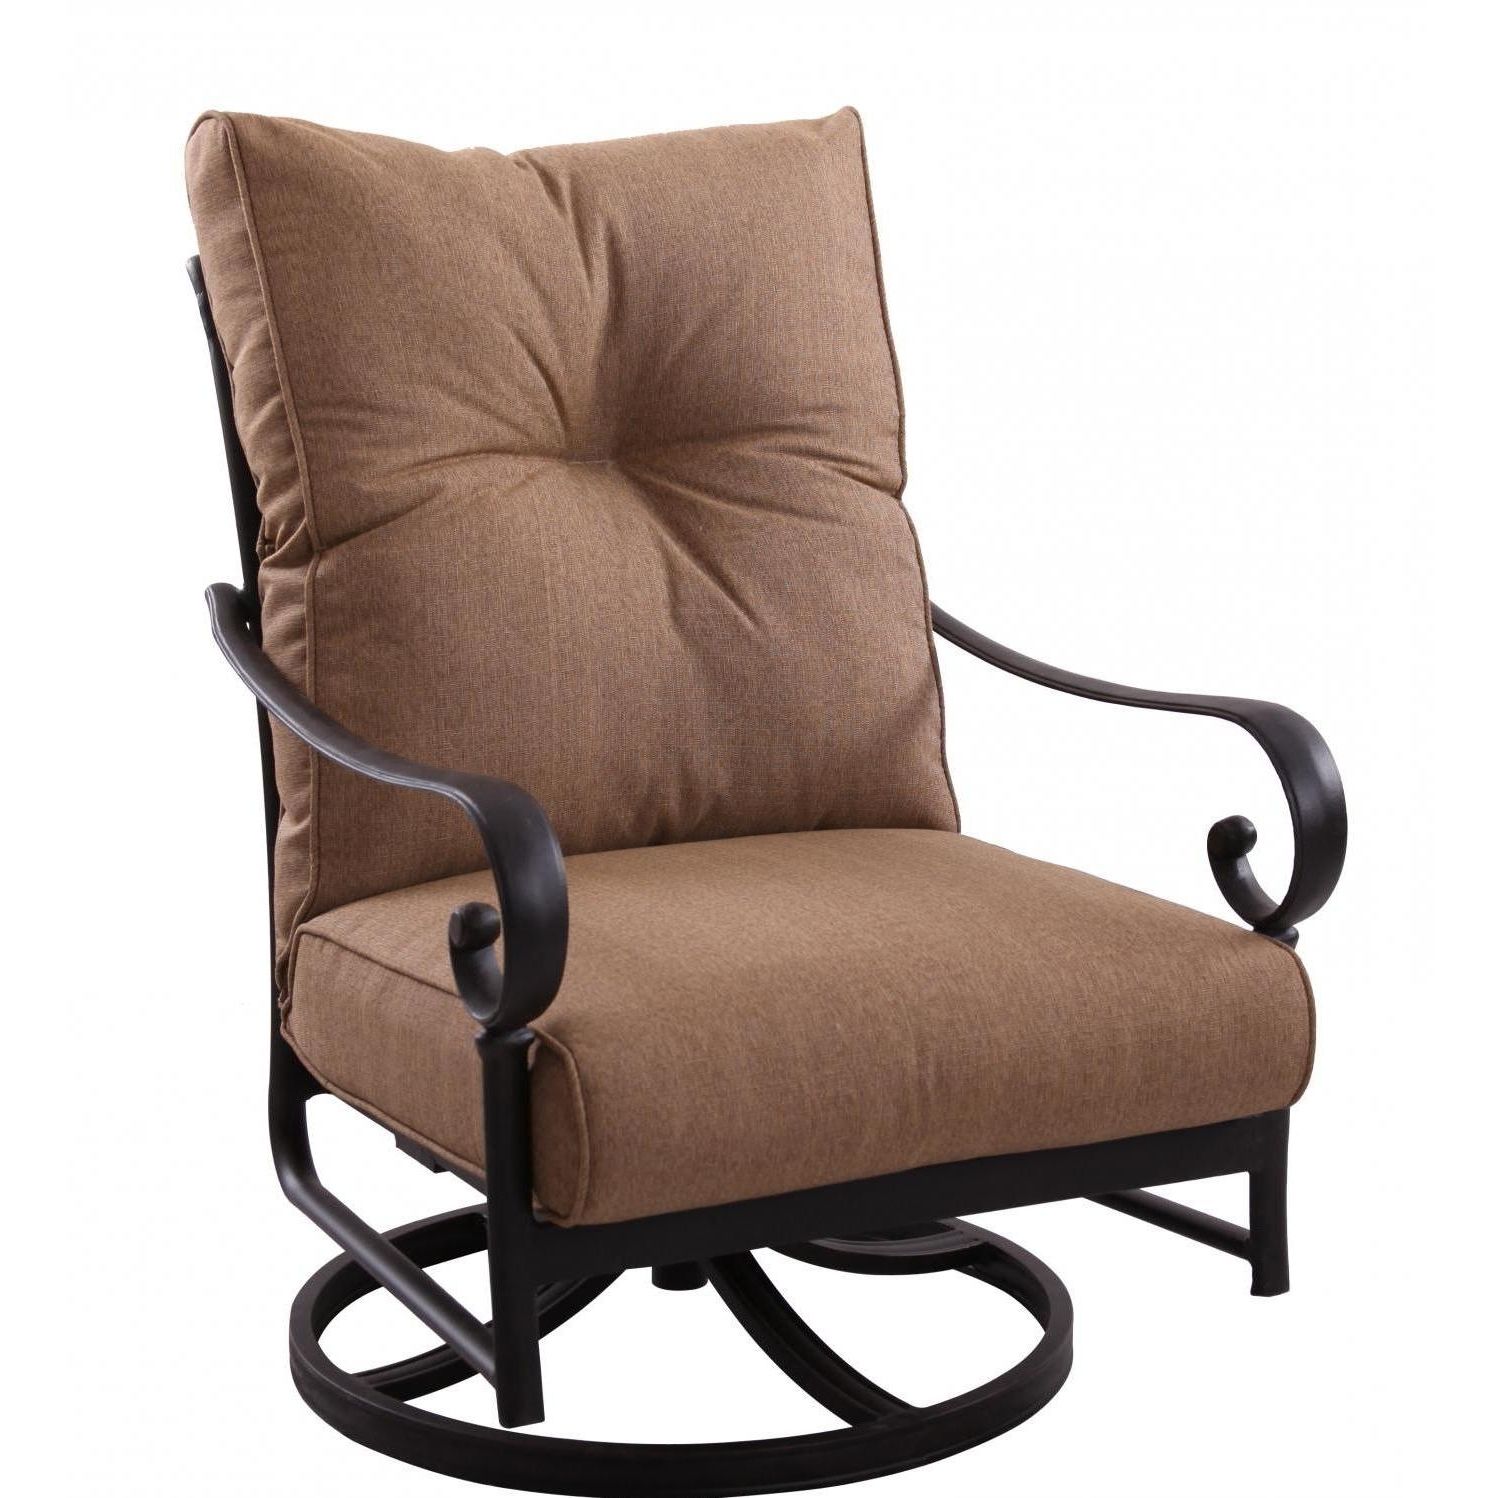 Patio Rocking Swivel Chairs Throughout Most Current Darlee Santa Anita 3 Piece Aluminum Patio Conversation Seating Set (View 4 of 15)